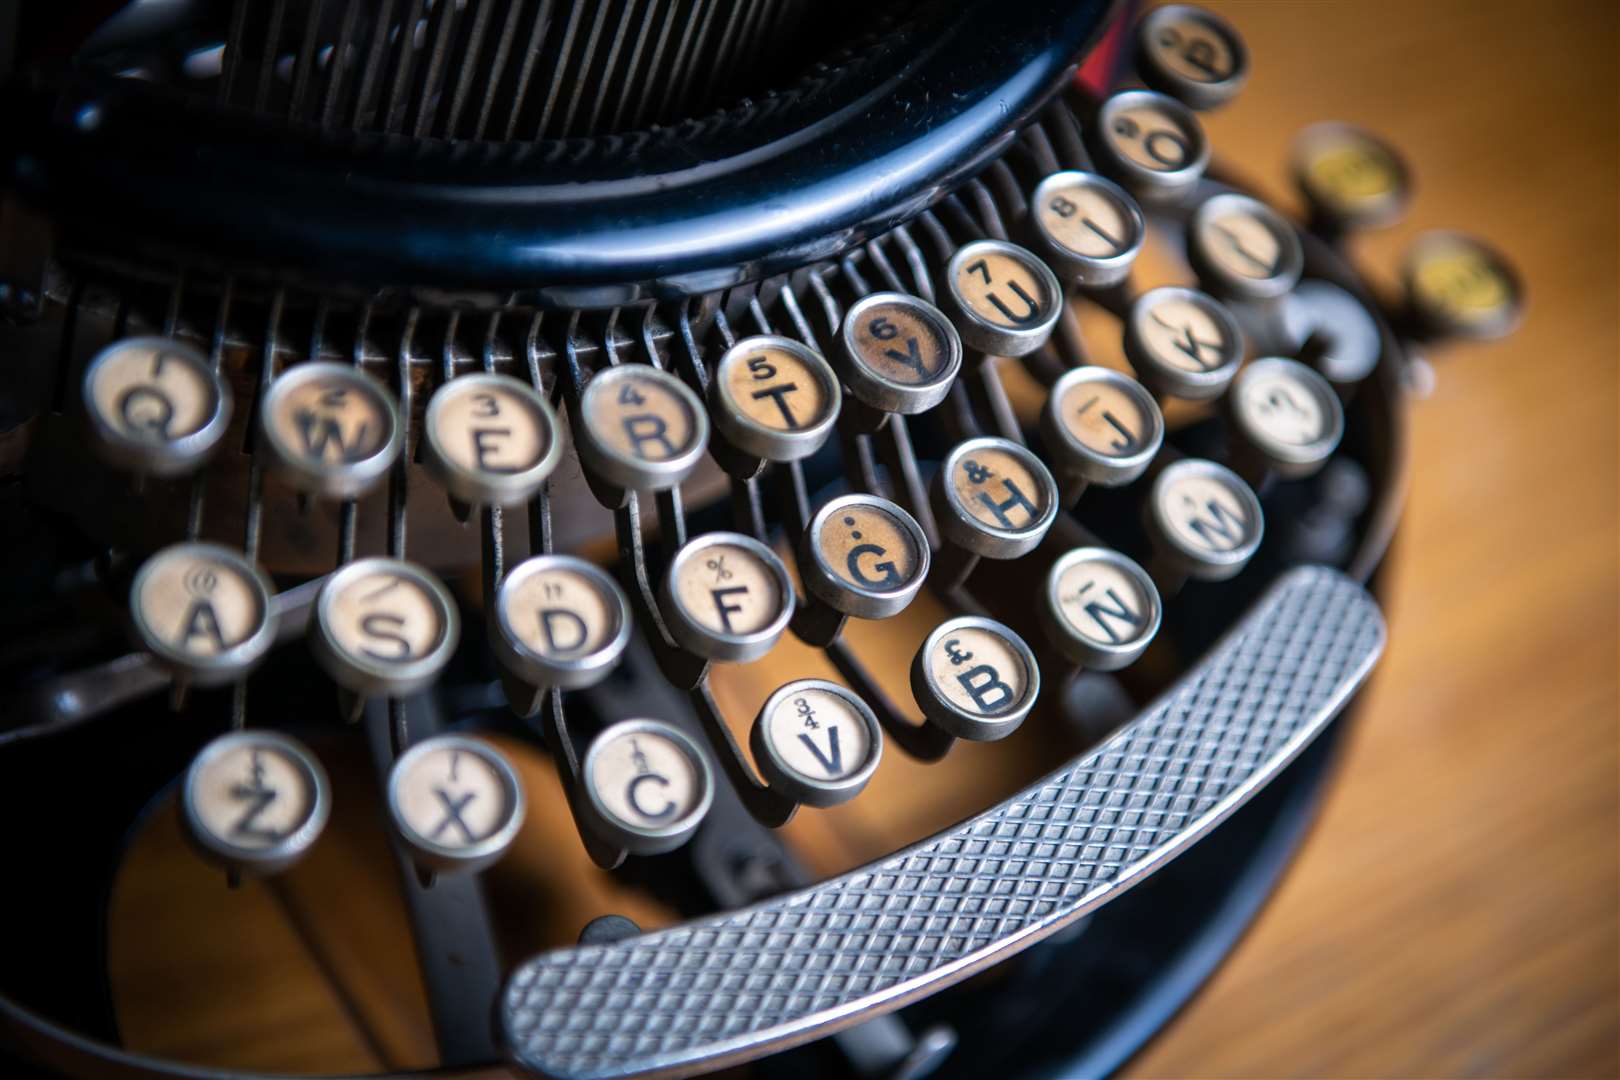 James Henderson has a collection of about 100 typewriters including some dating back to the early 20th century. Picture: Callum Mackay.